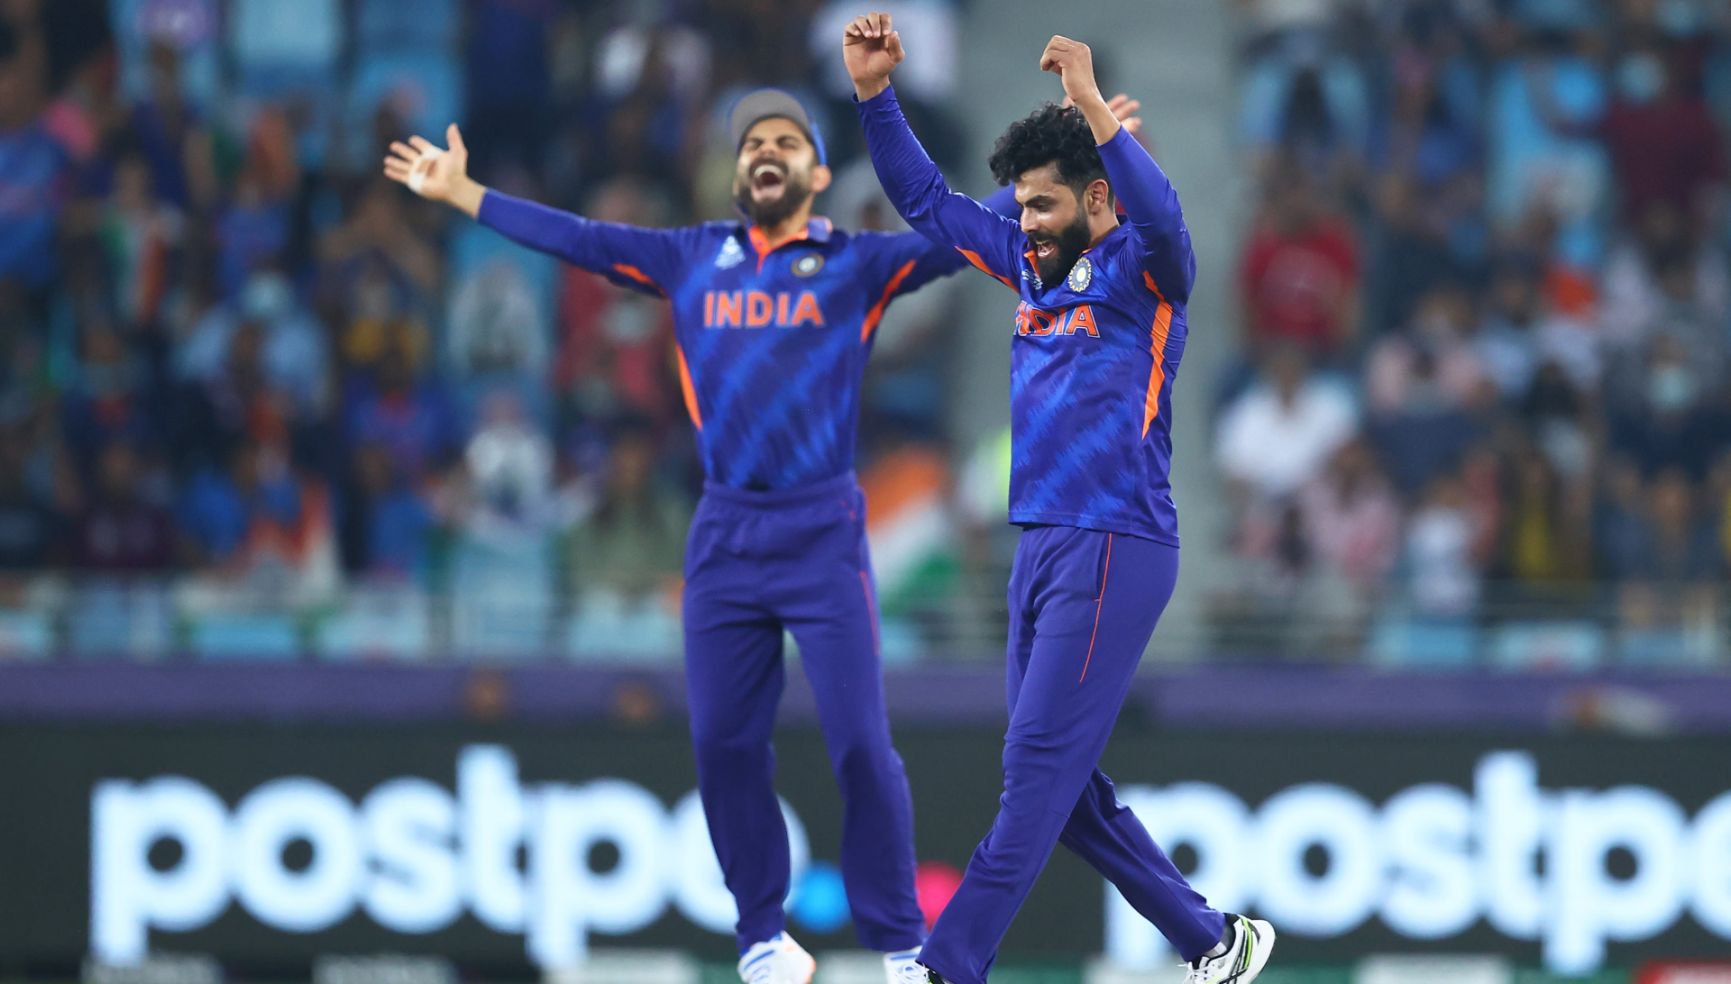 T20 World Cup | Bruised India look to test bench strength as Namibia aim to add insult to injury